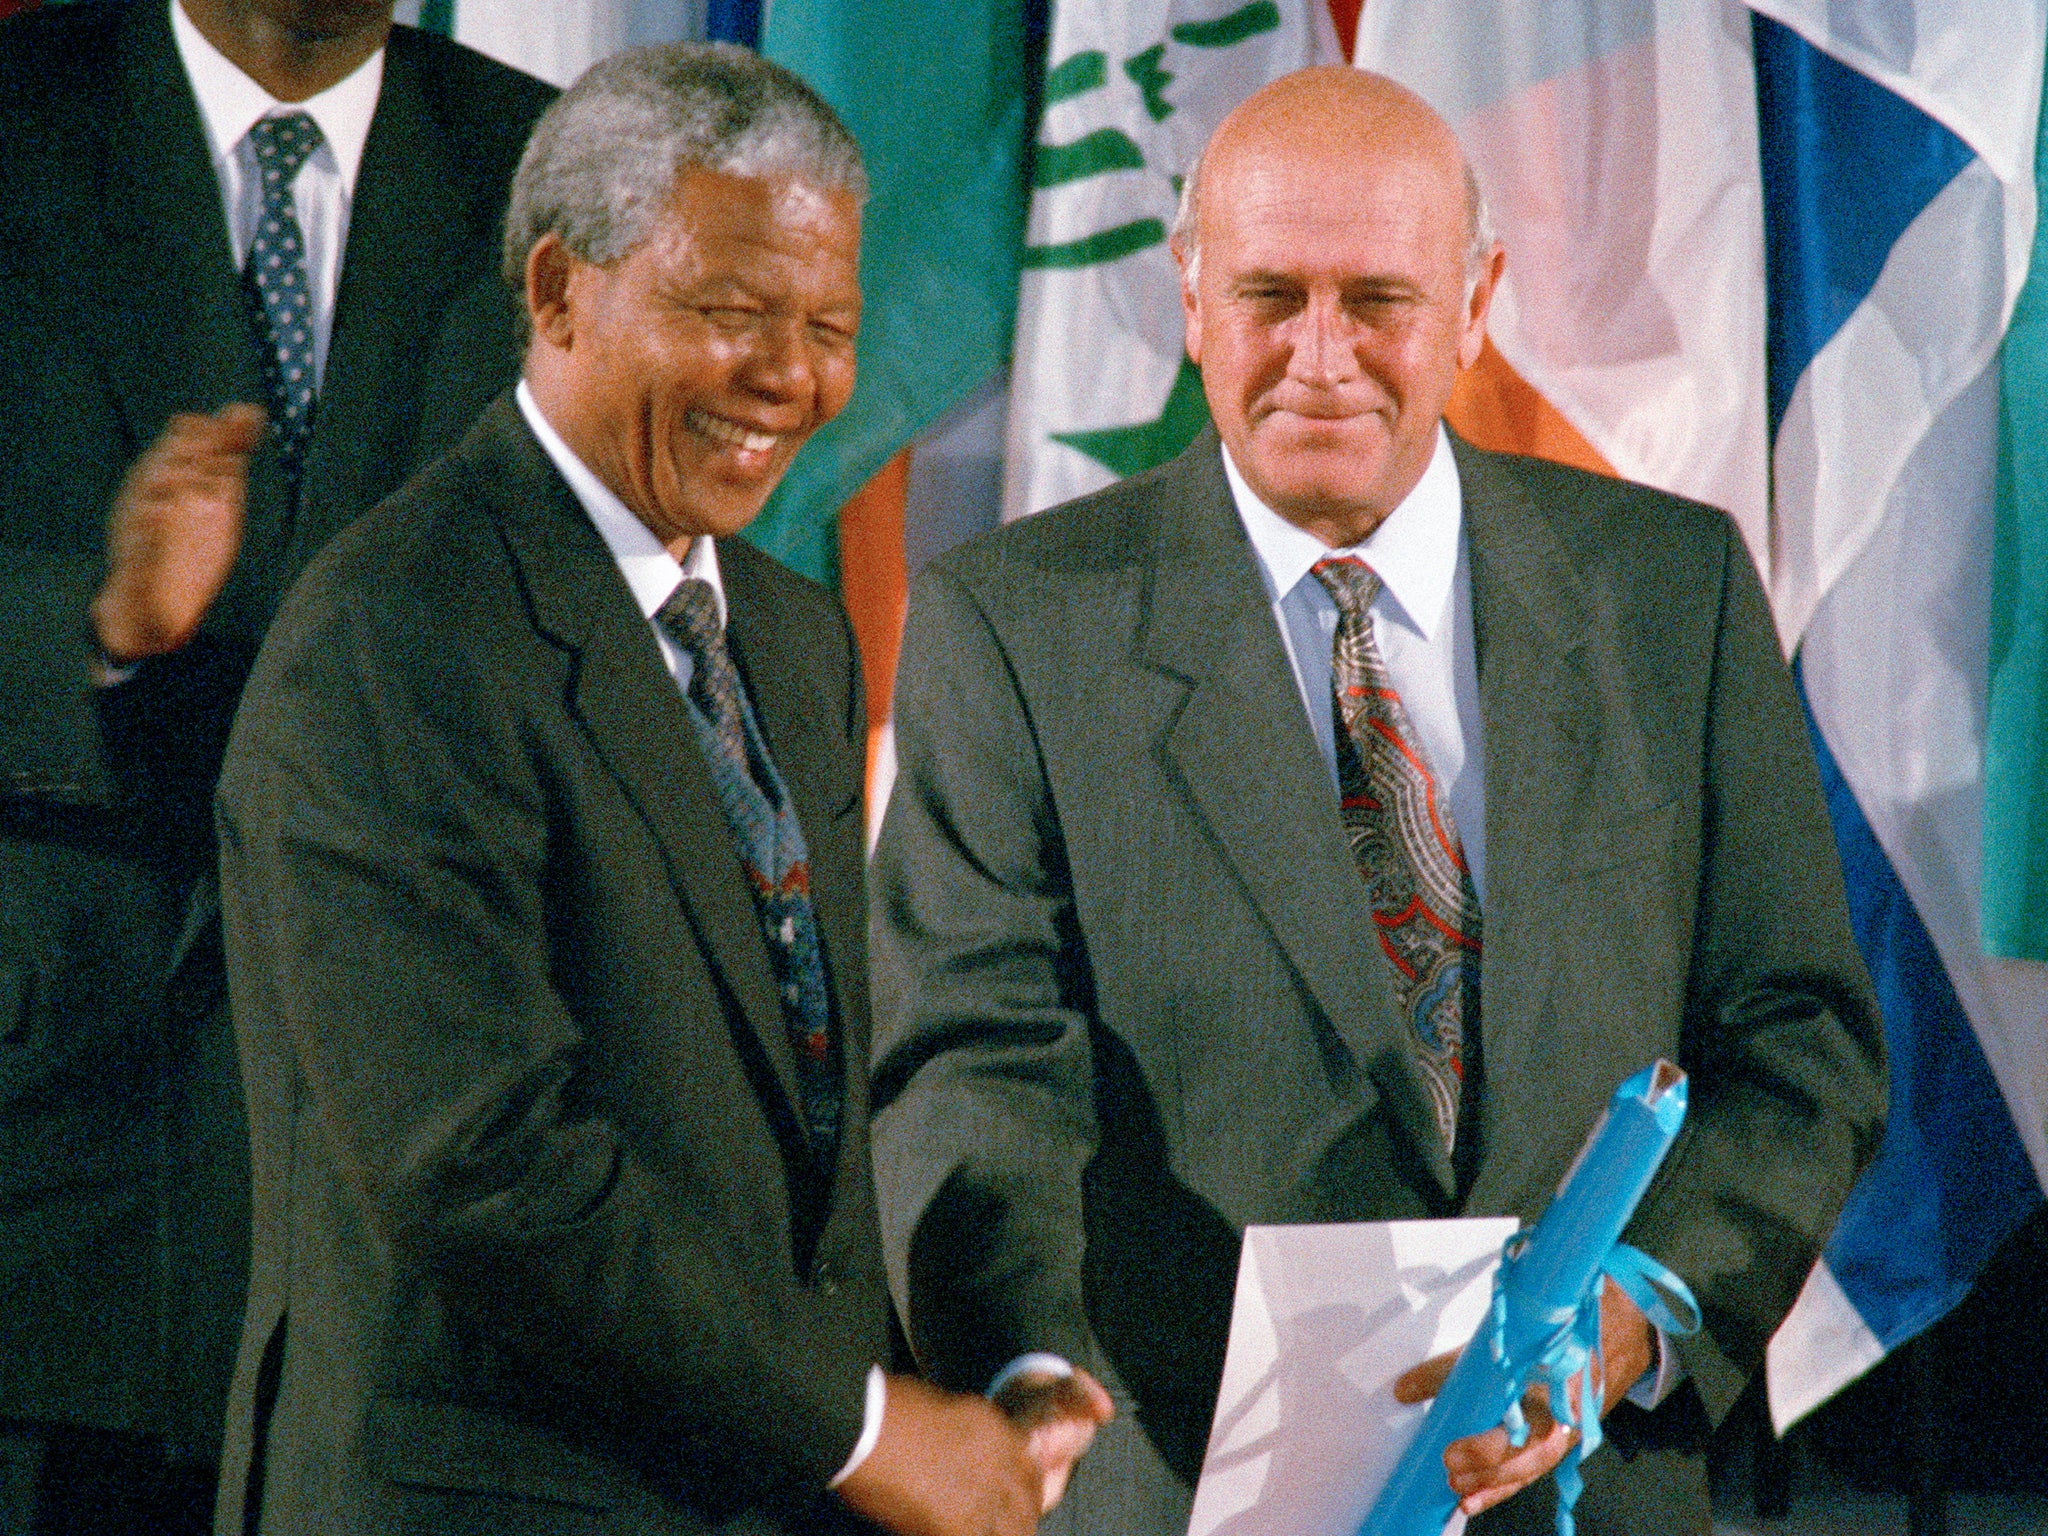 Alongside Nelson Mandela as they receive the Unesco Peace Prize in the early Nineties